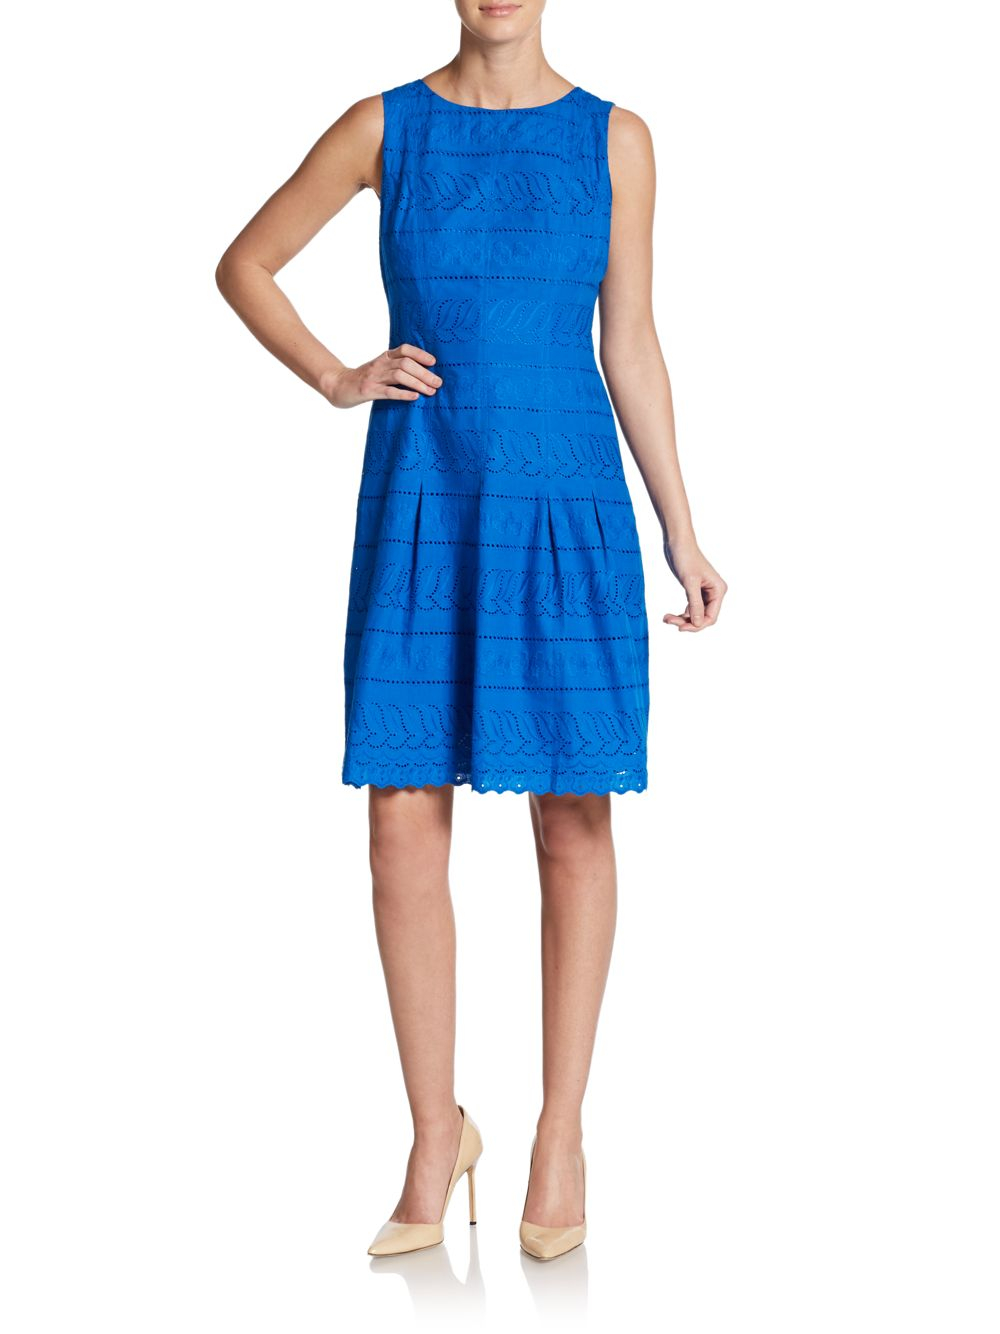 Lyst - Ivanka Trump Embroidered Eyelet A-line Dress in Blue